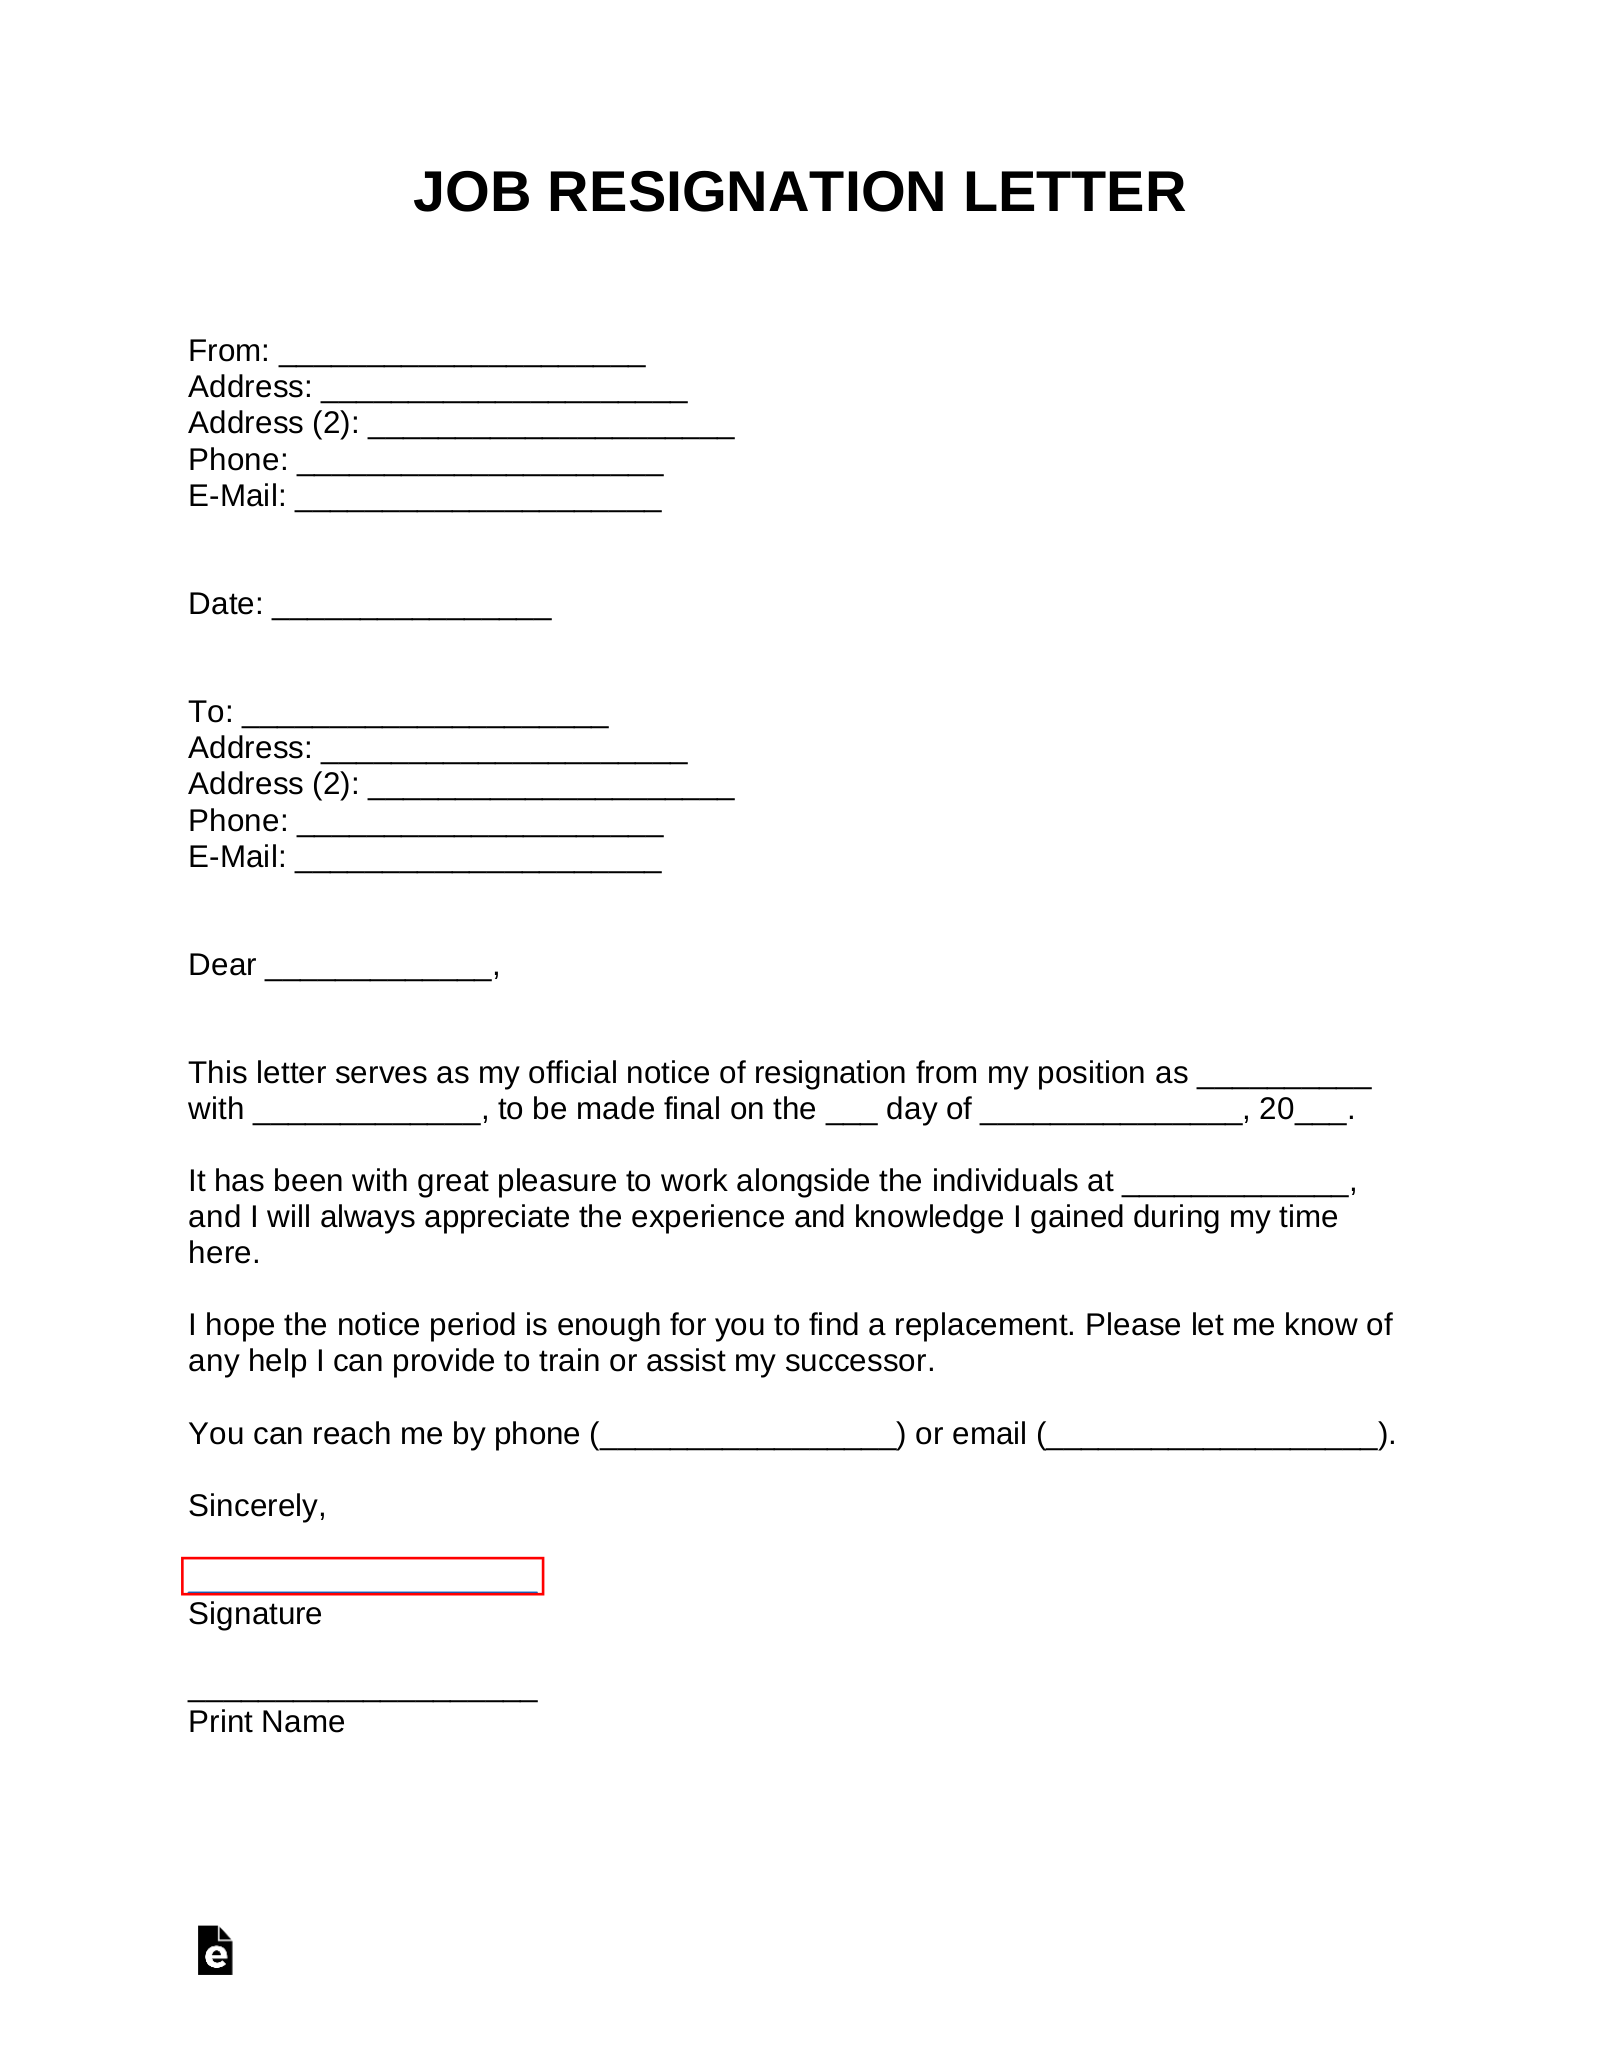 free-job-resignation-letter-template-with-samples-pdf-word-eforms